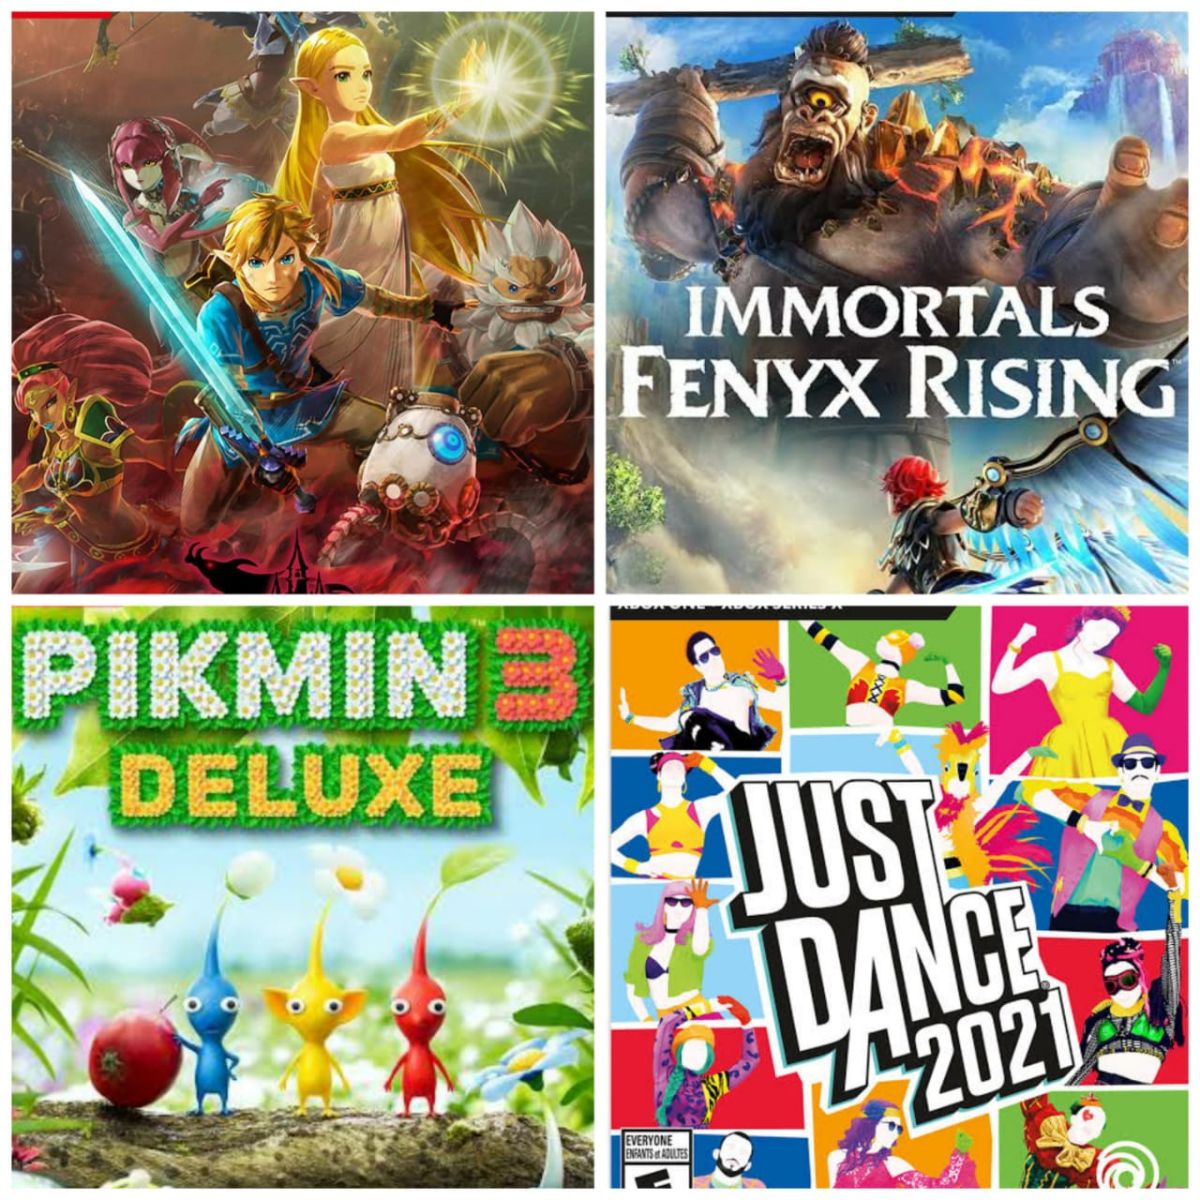 Review: Immortals: Fenyx Rising, Pikmin 3 Deluxe Edition, Zelda Hyrule Warriors Age of Calamity, and Just Dance 2021